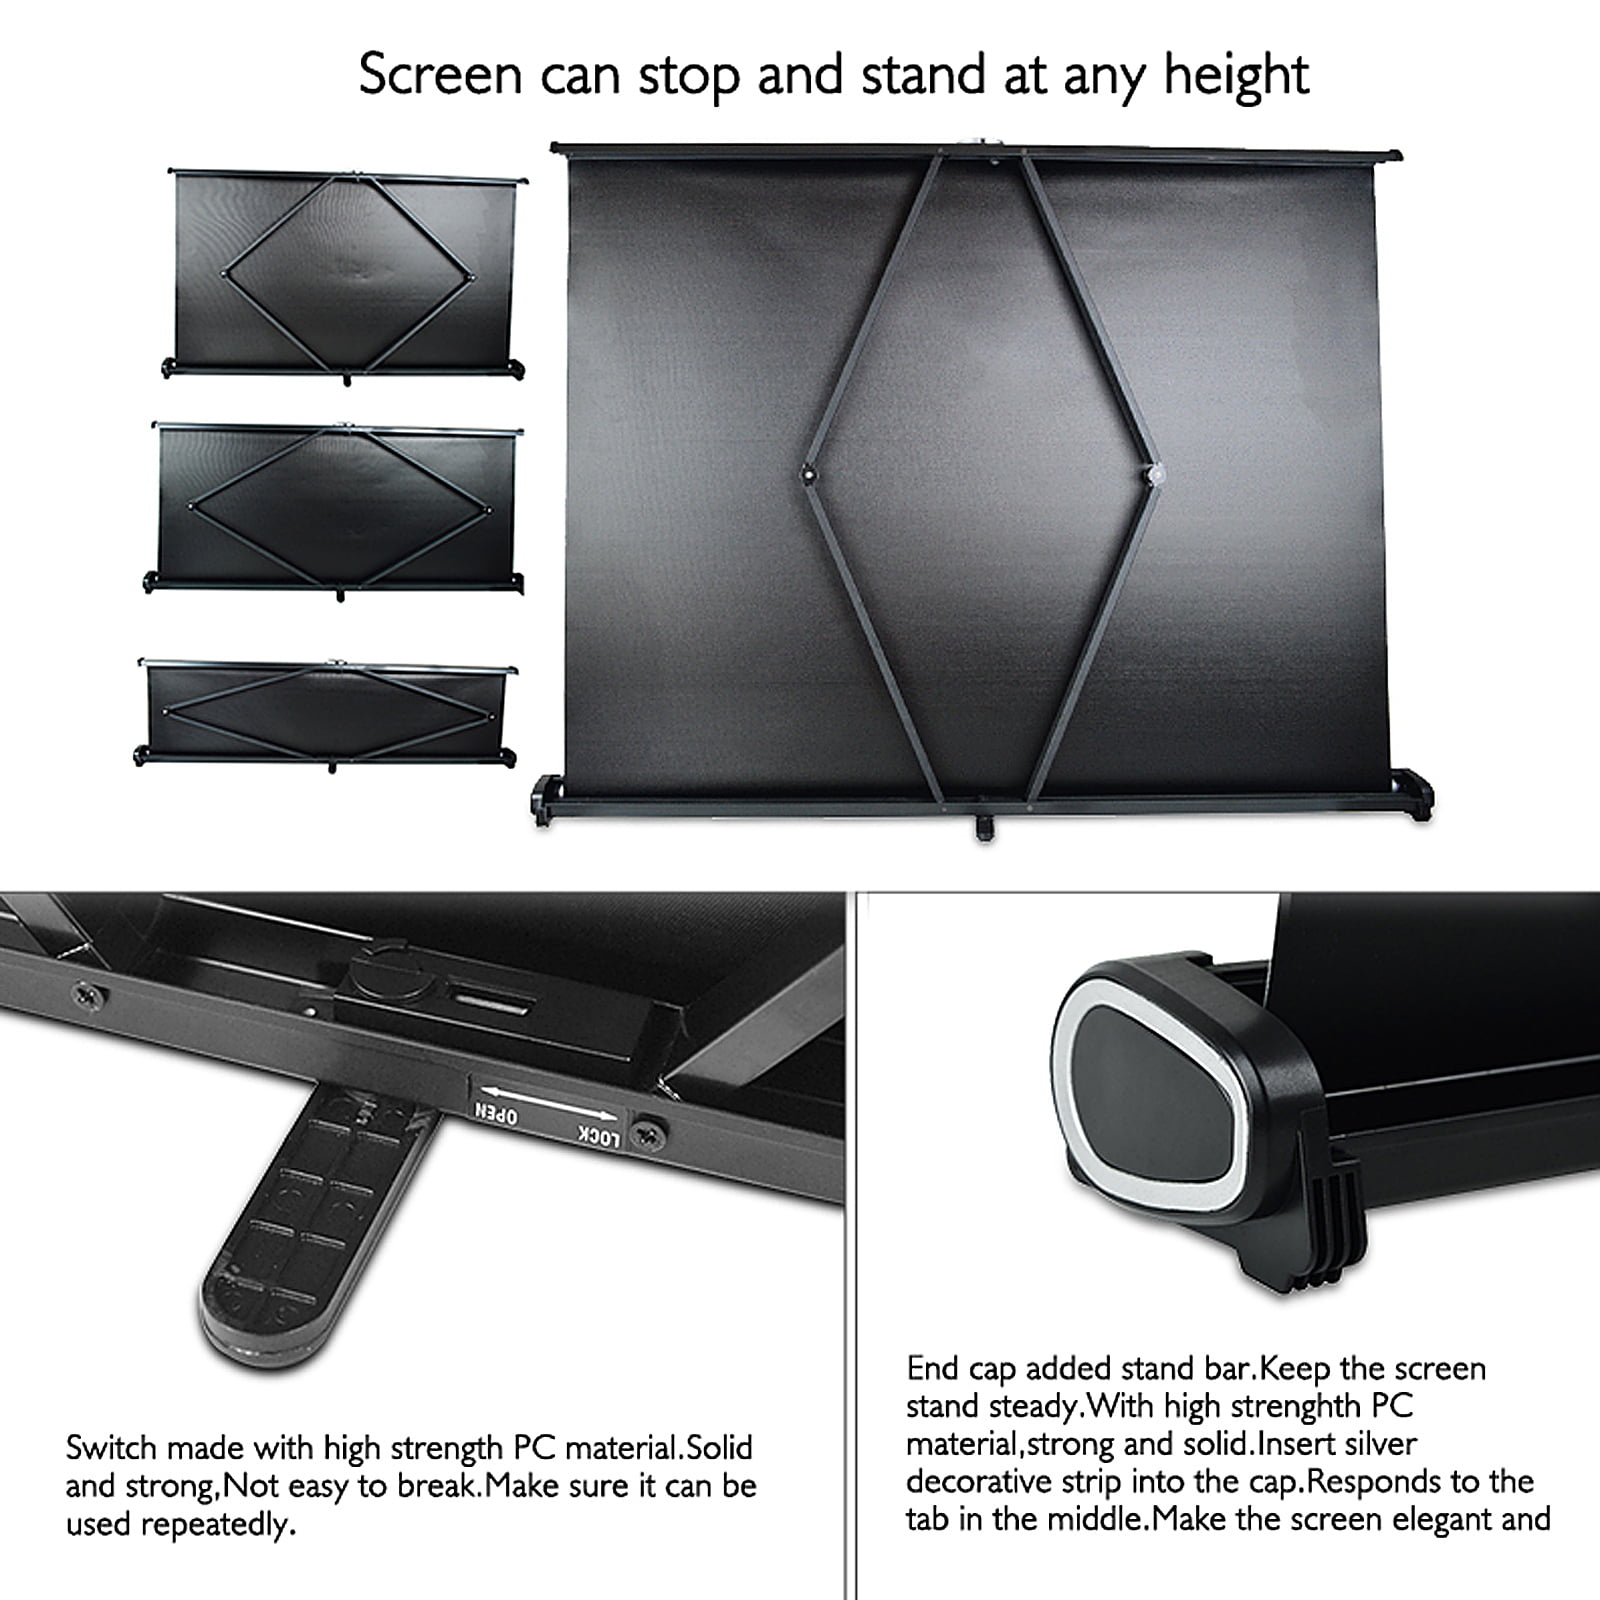 50-Inch Projector Screen 16:9 Tabletop Projection Screen Manual Pull Up Folding Projecting Screen Home Theater for DLP Projector Handheld Projector